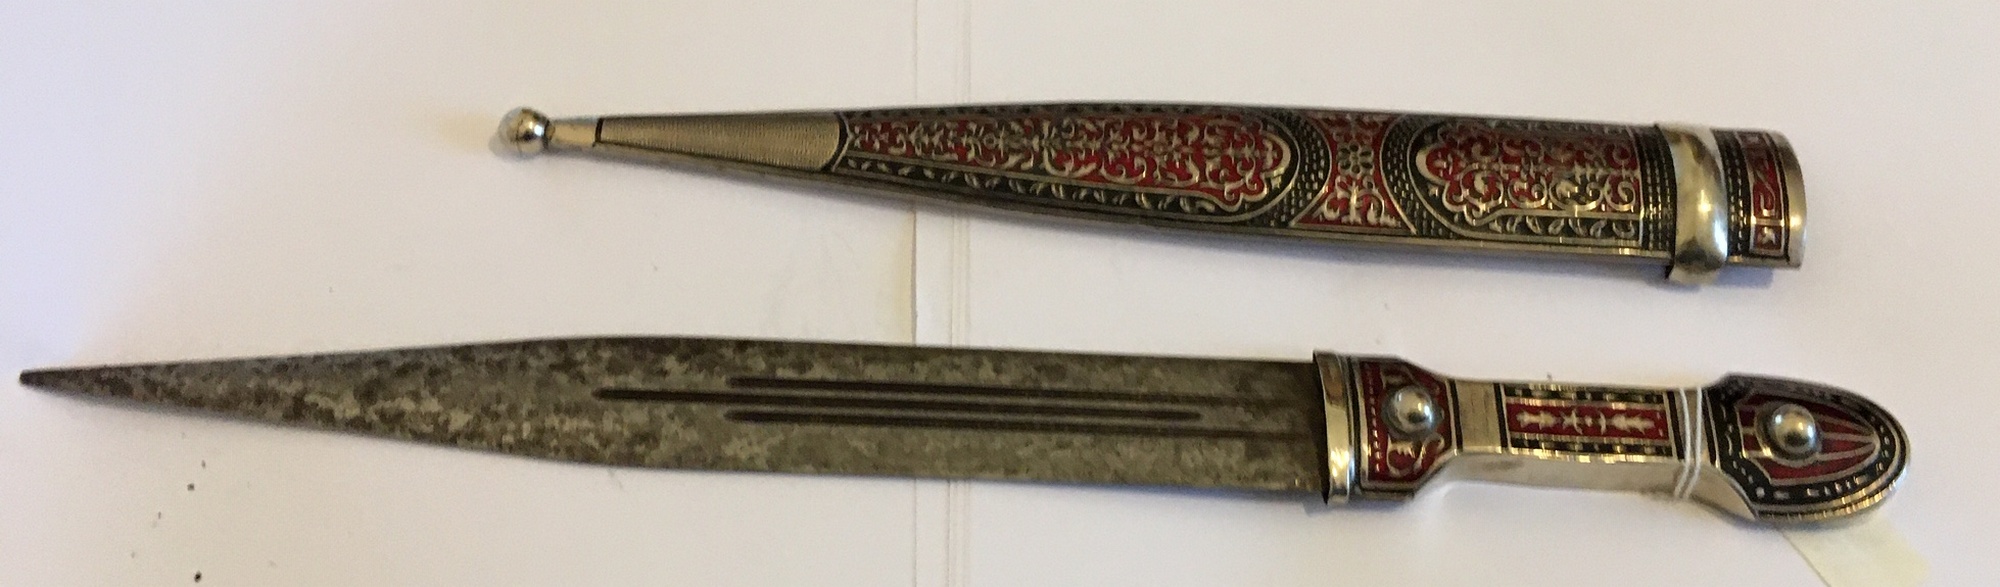 Antique Russian Kindjal Dagger - 43cm overall - blade 27.6cm. - Image 4 of 7